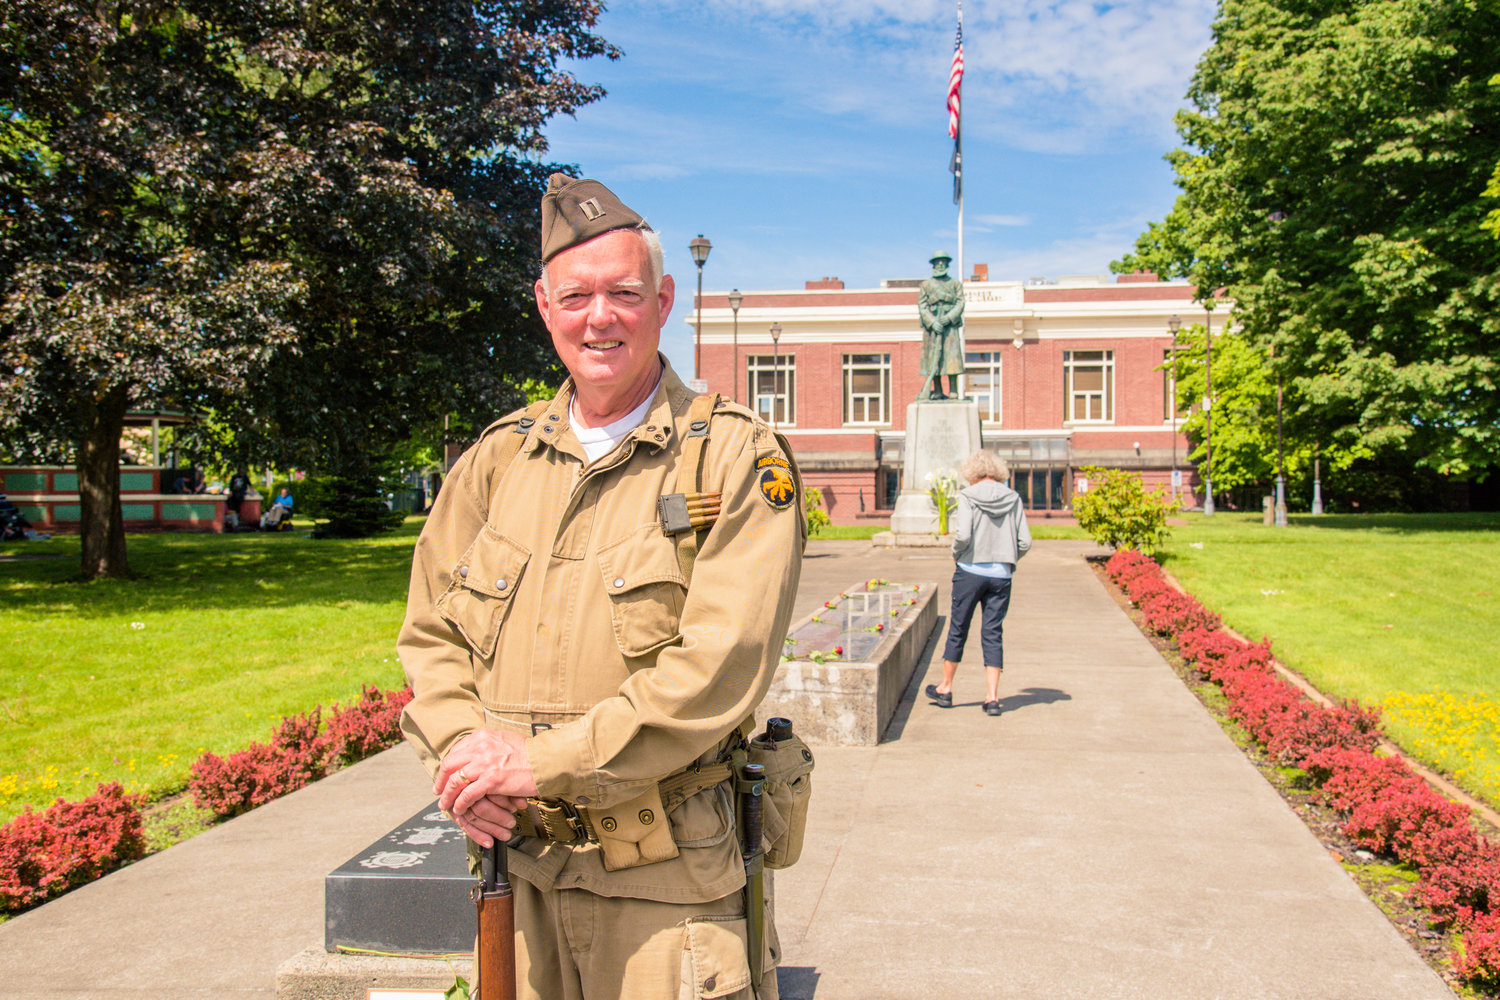 America’s Team Museum owner Peter Lahmann sports a World War II era jumpsuit on Memorial Day while providing information and history to visitors at George Washington Park in Centralia Monday morning.